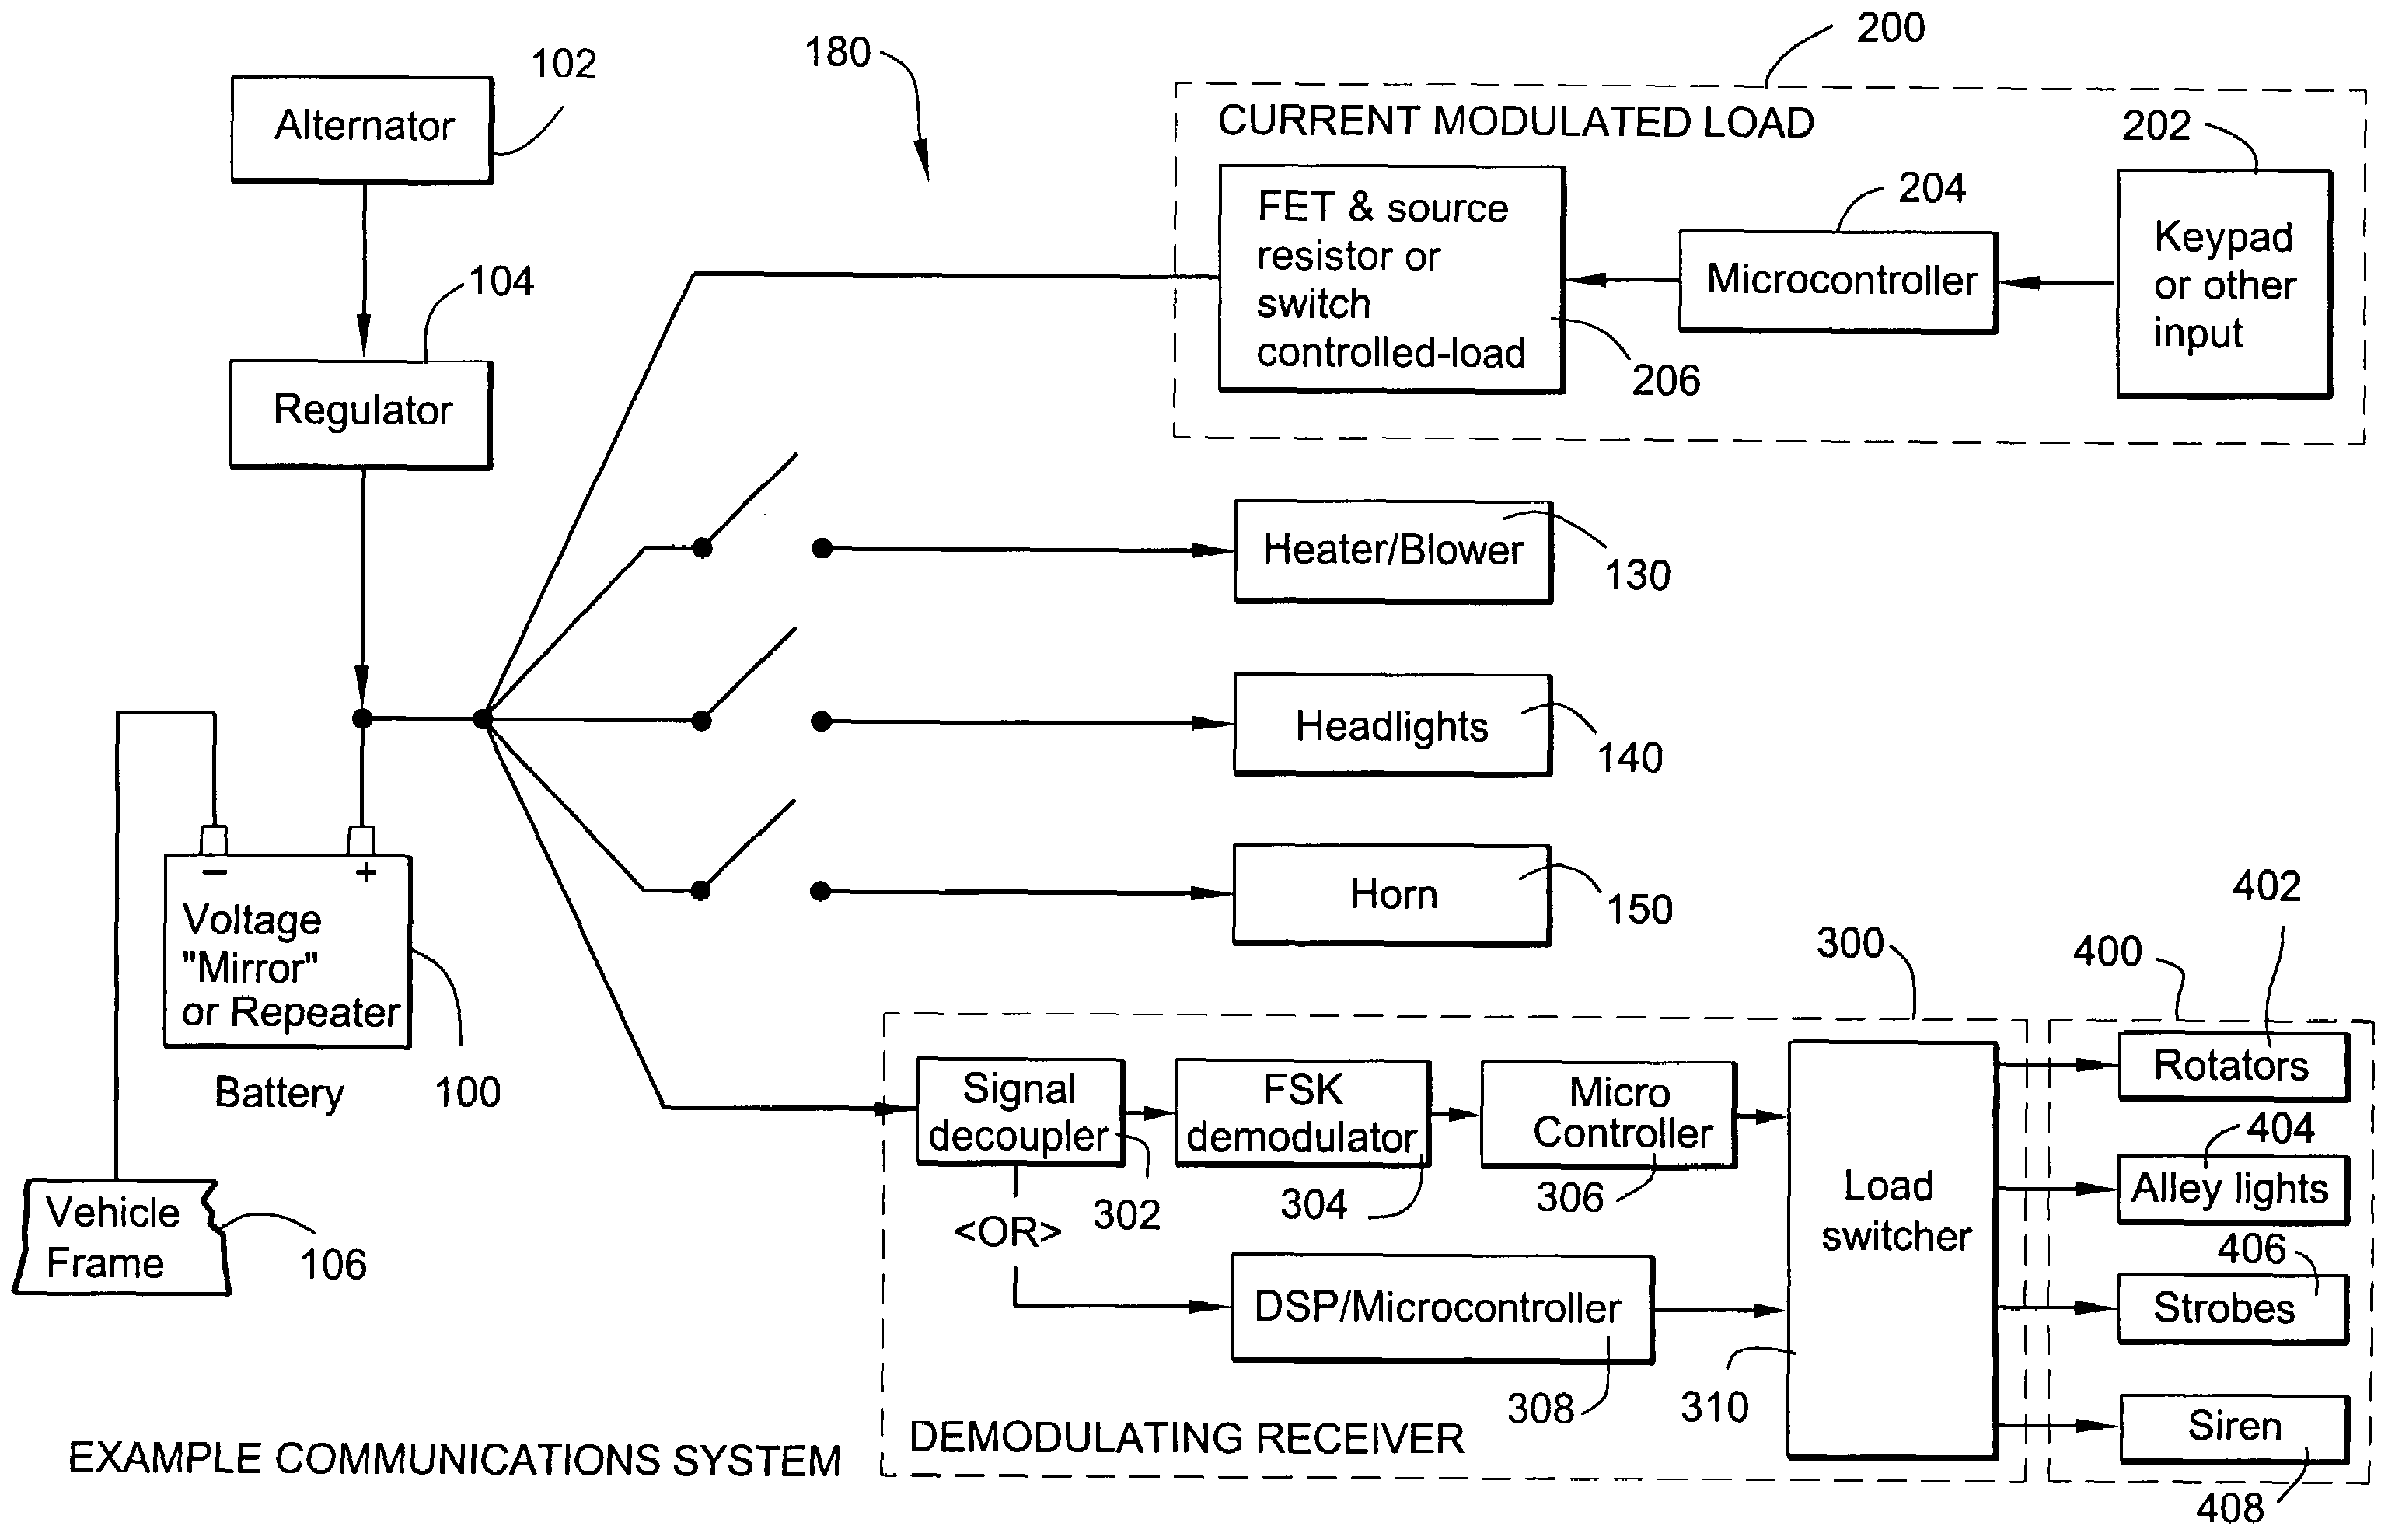 Method and apparatus for communicating control and other information over a power bus